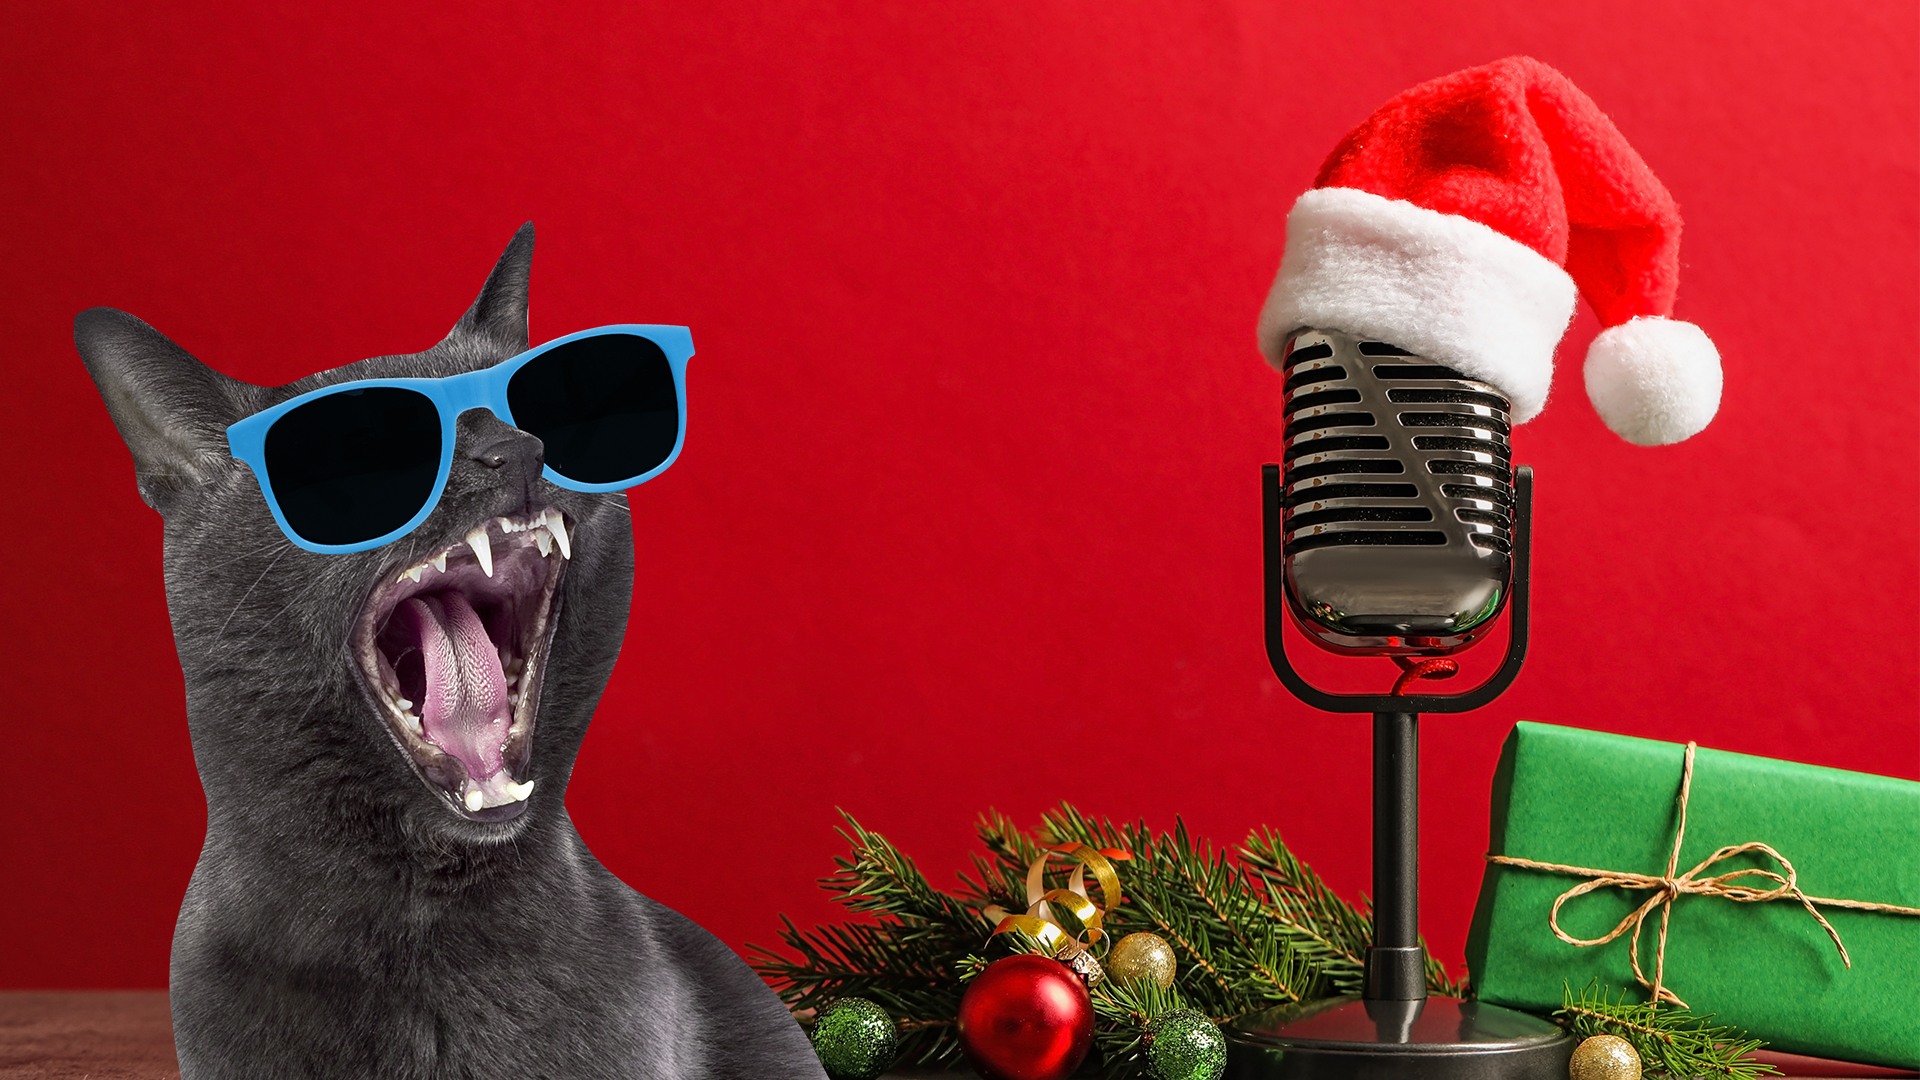 A cat singing a Christmas song